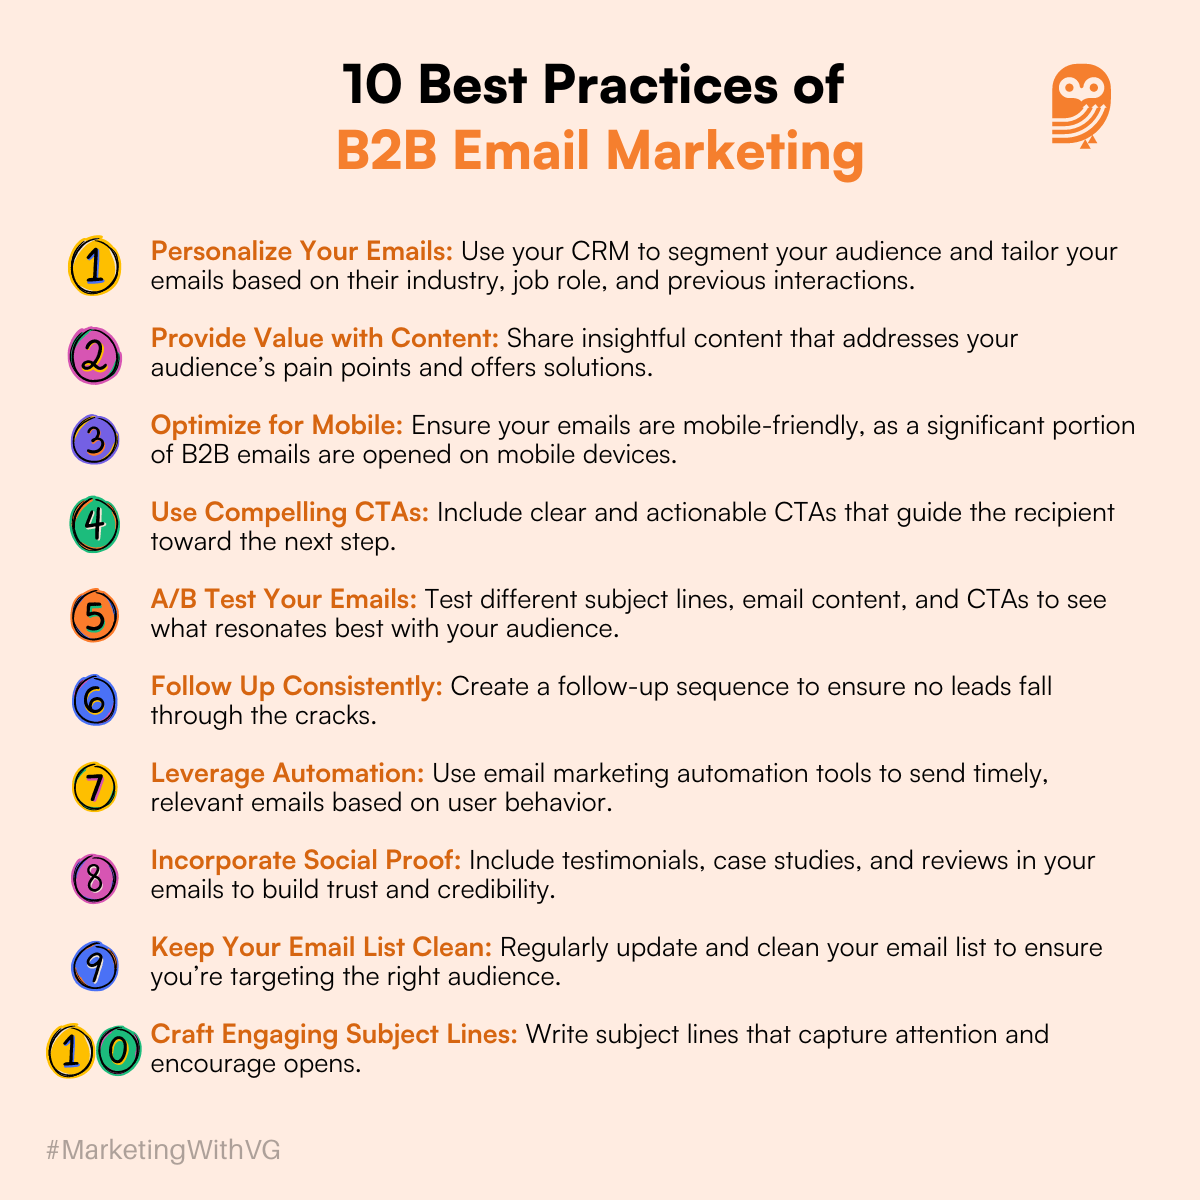 10 Best Practices of B2B Email Marketing